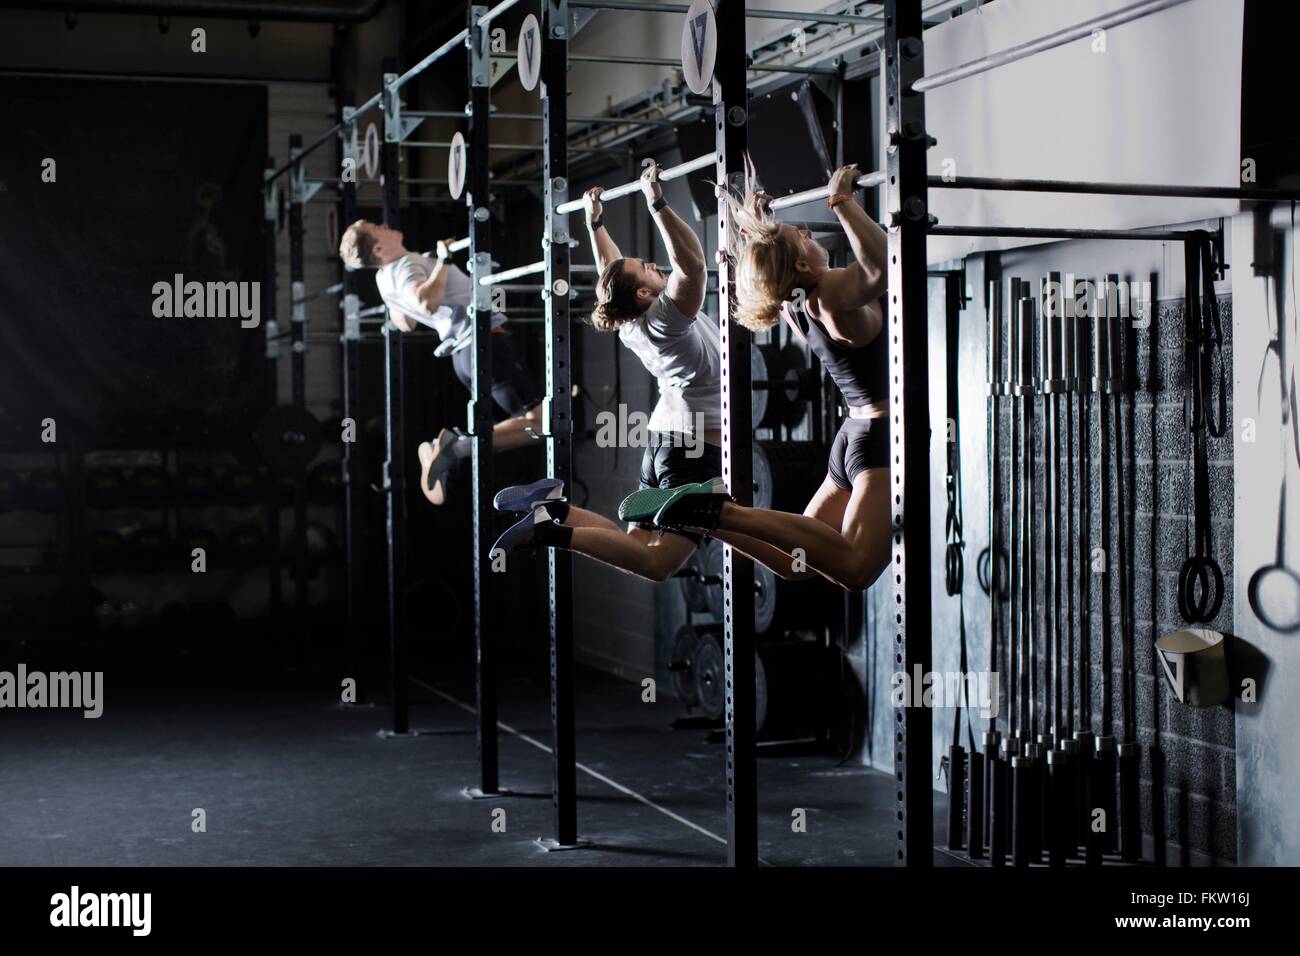 Three young adults training on wall bar in gym Stock Photo